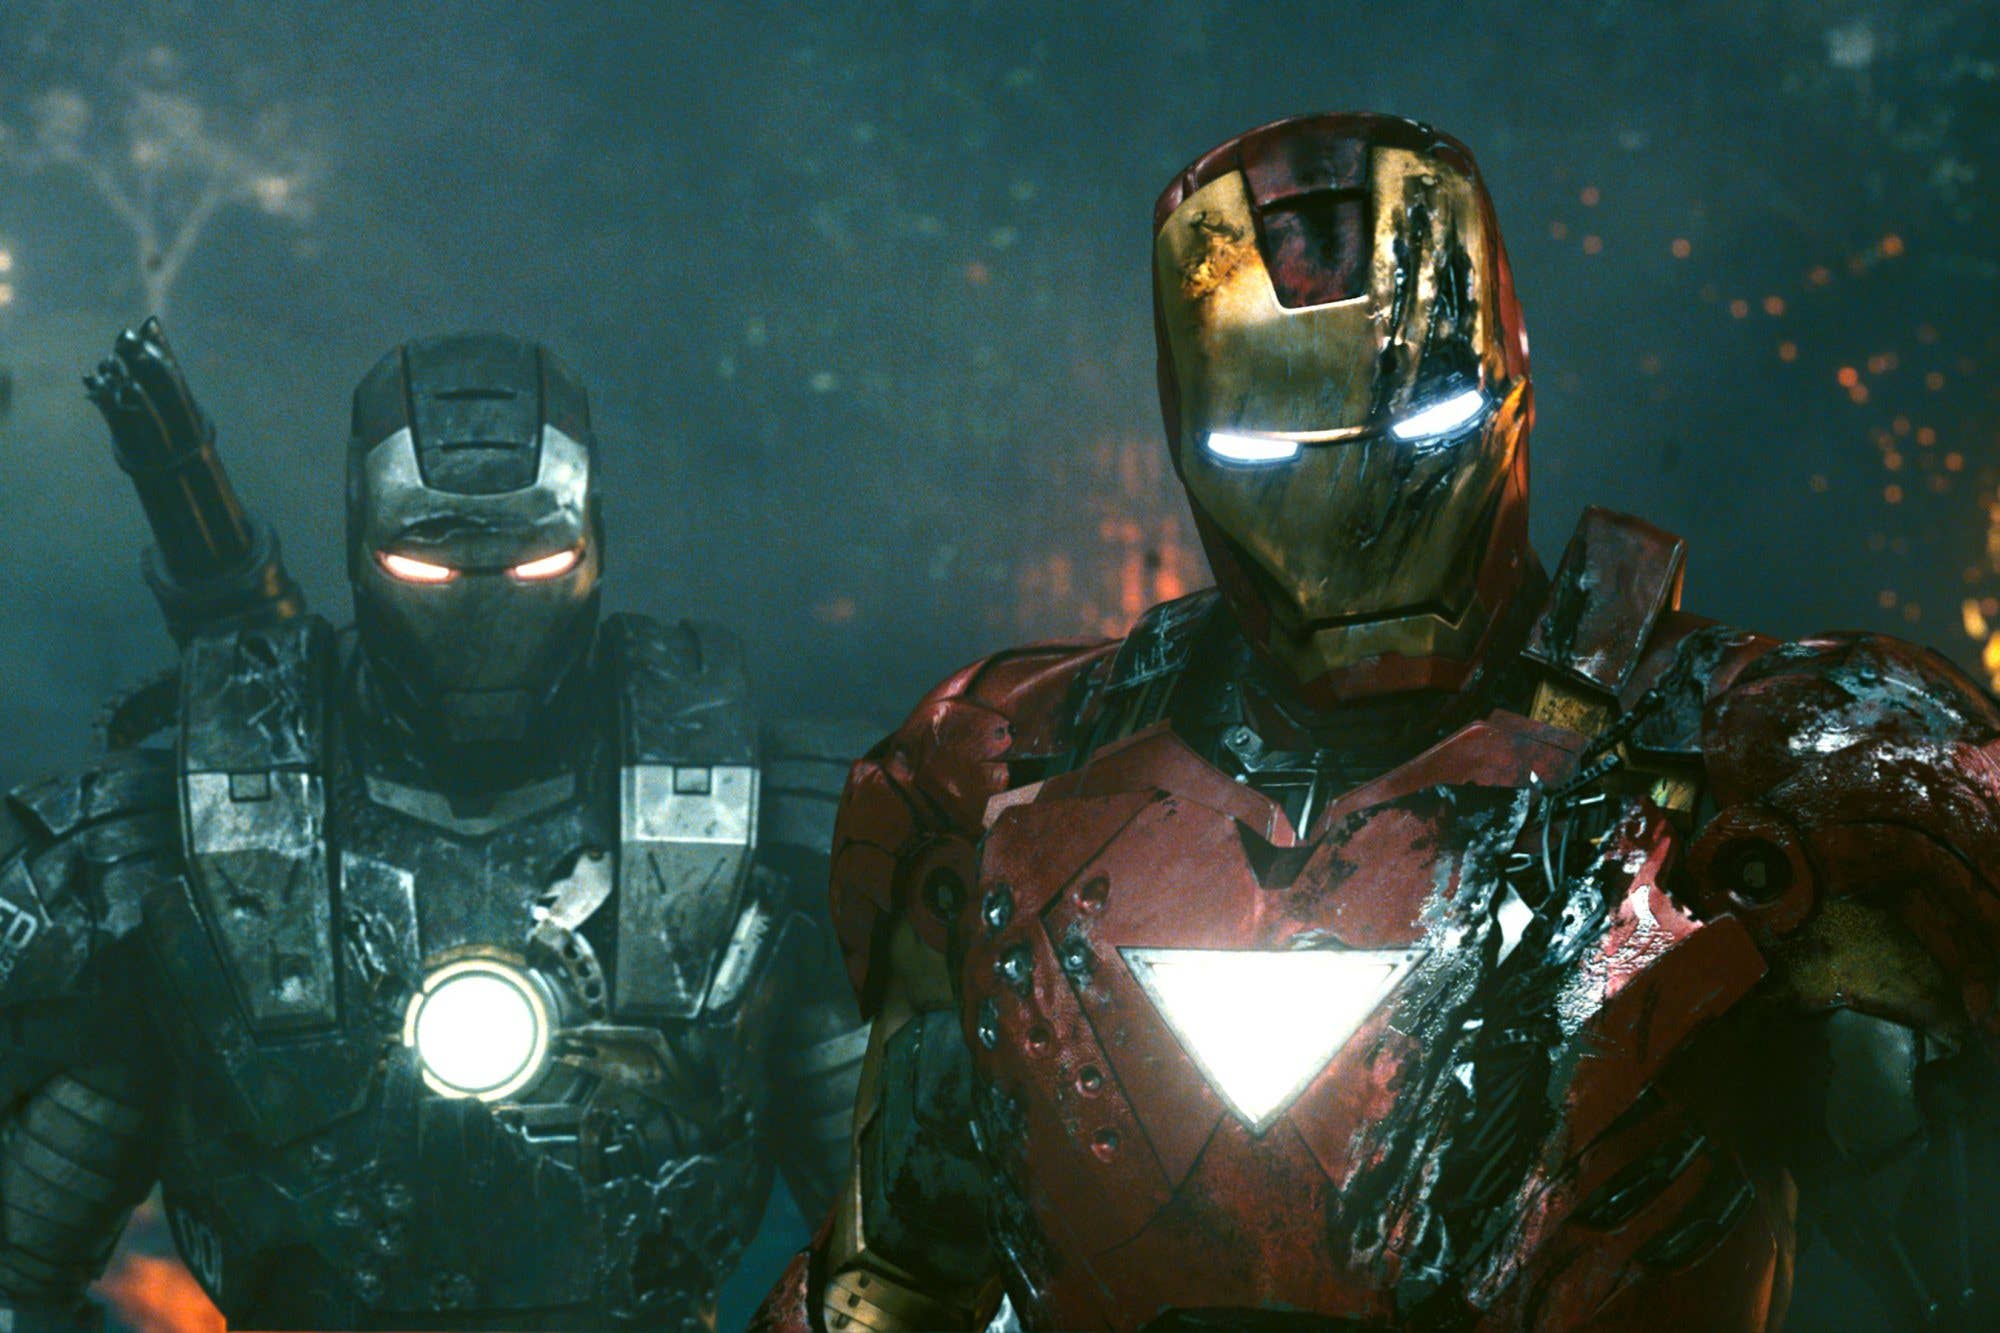 Iron Man 2' Turns 10: 21 Trivia Facts From the Massive Marvel